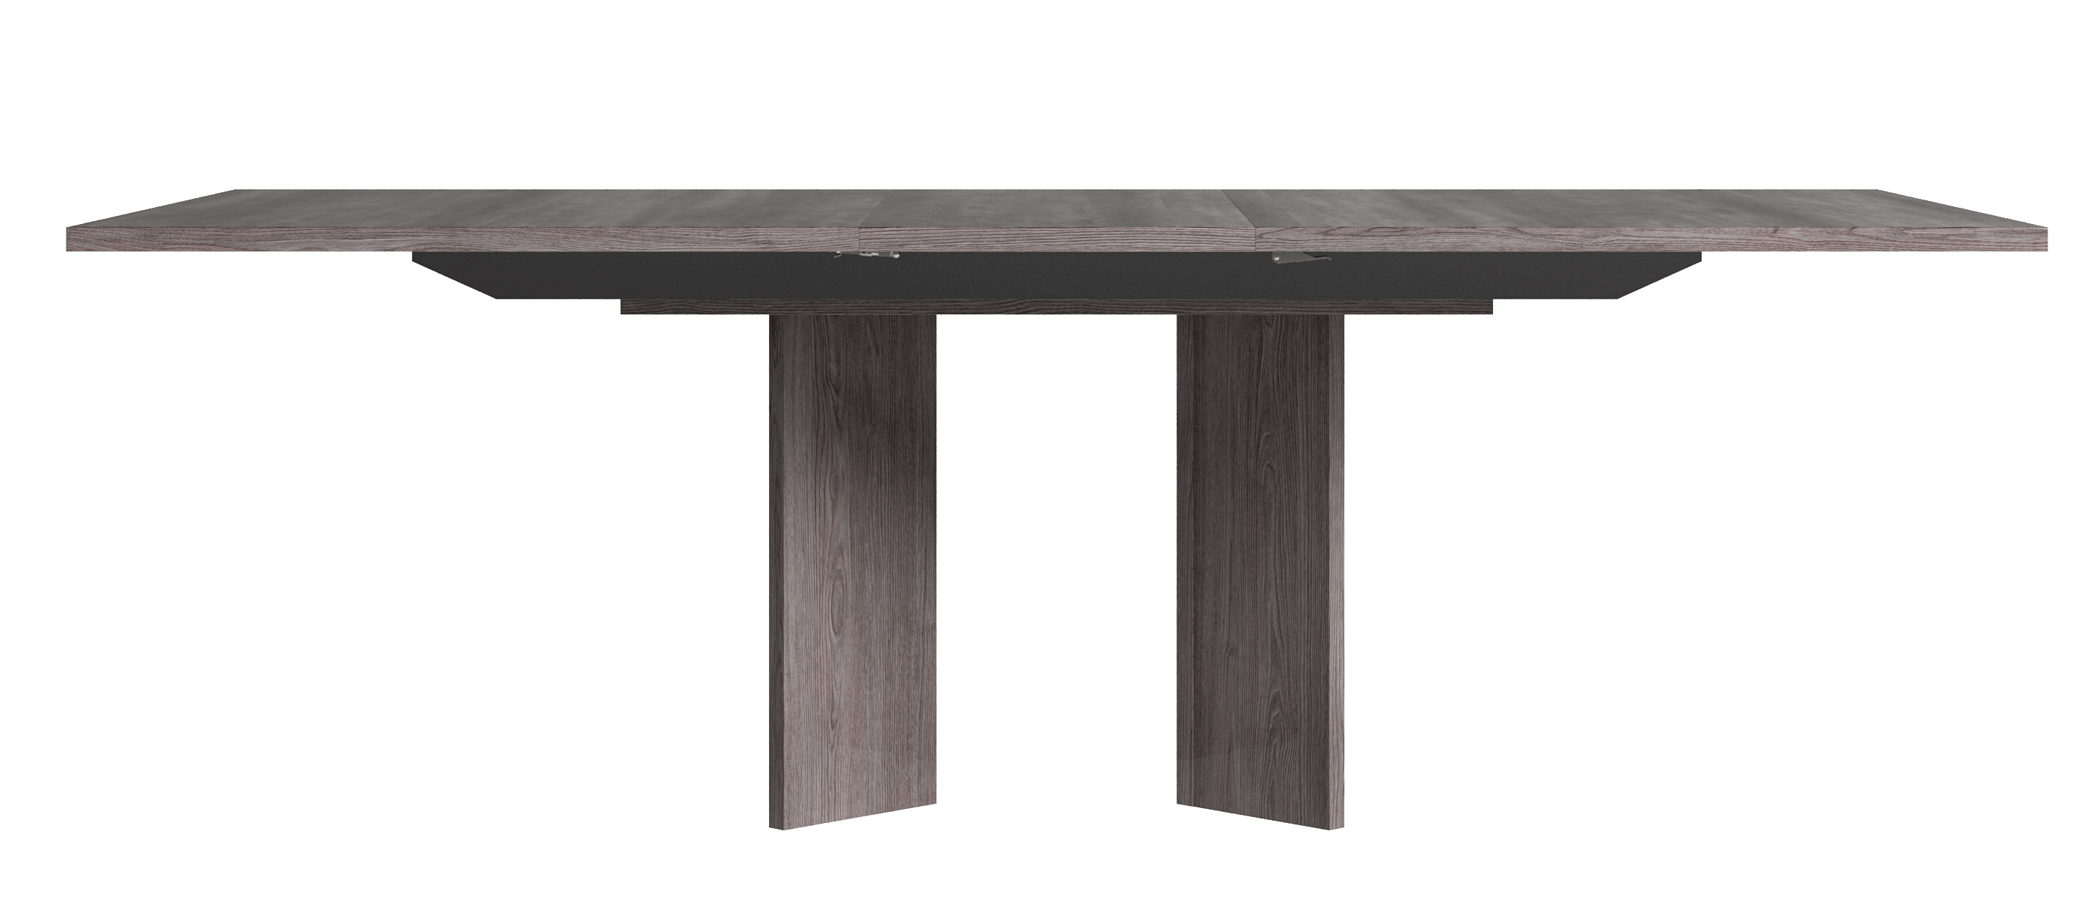 Dining Room Furniture Marble-Look Tables Viola Dining table